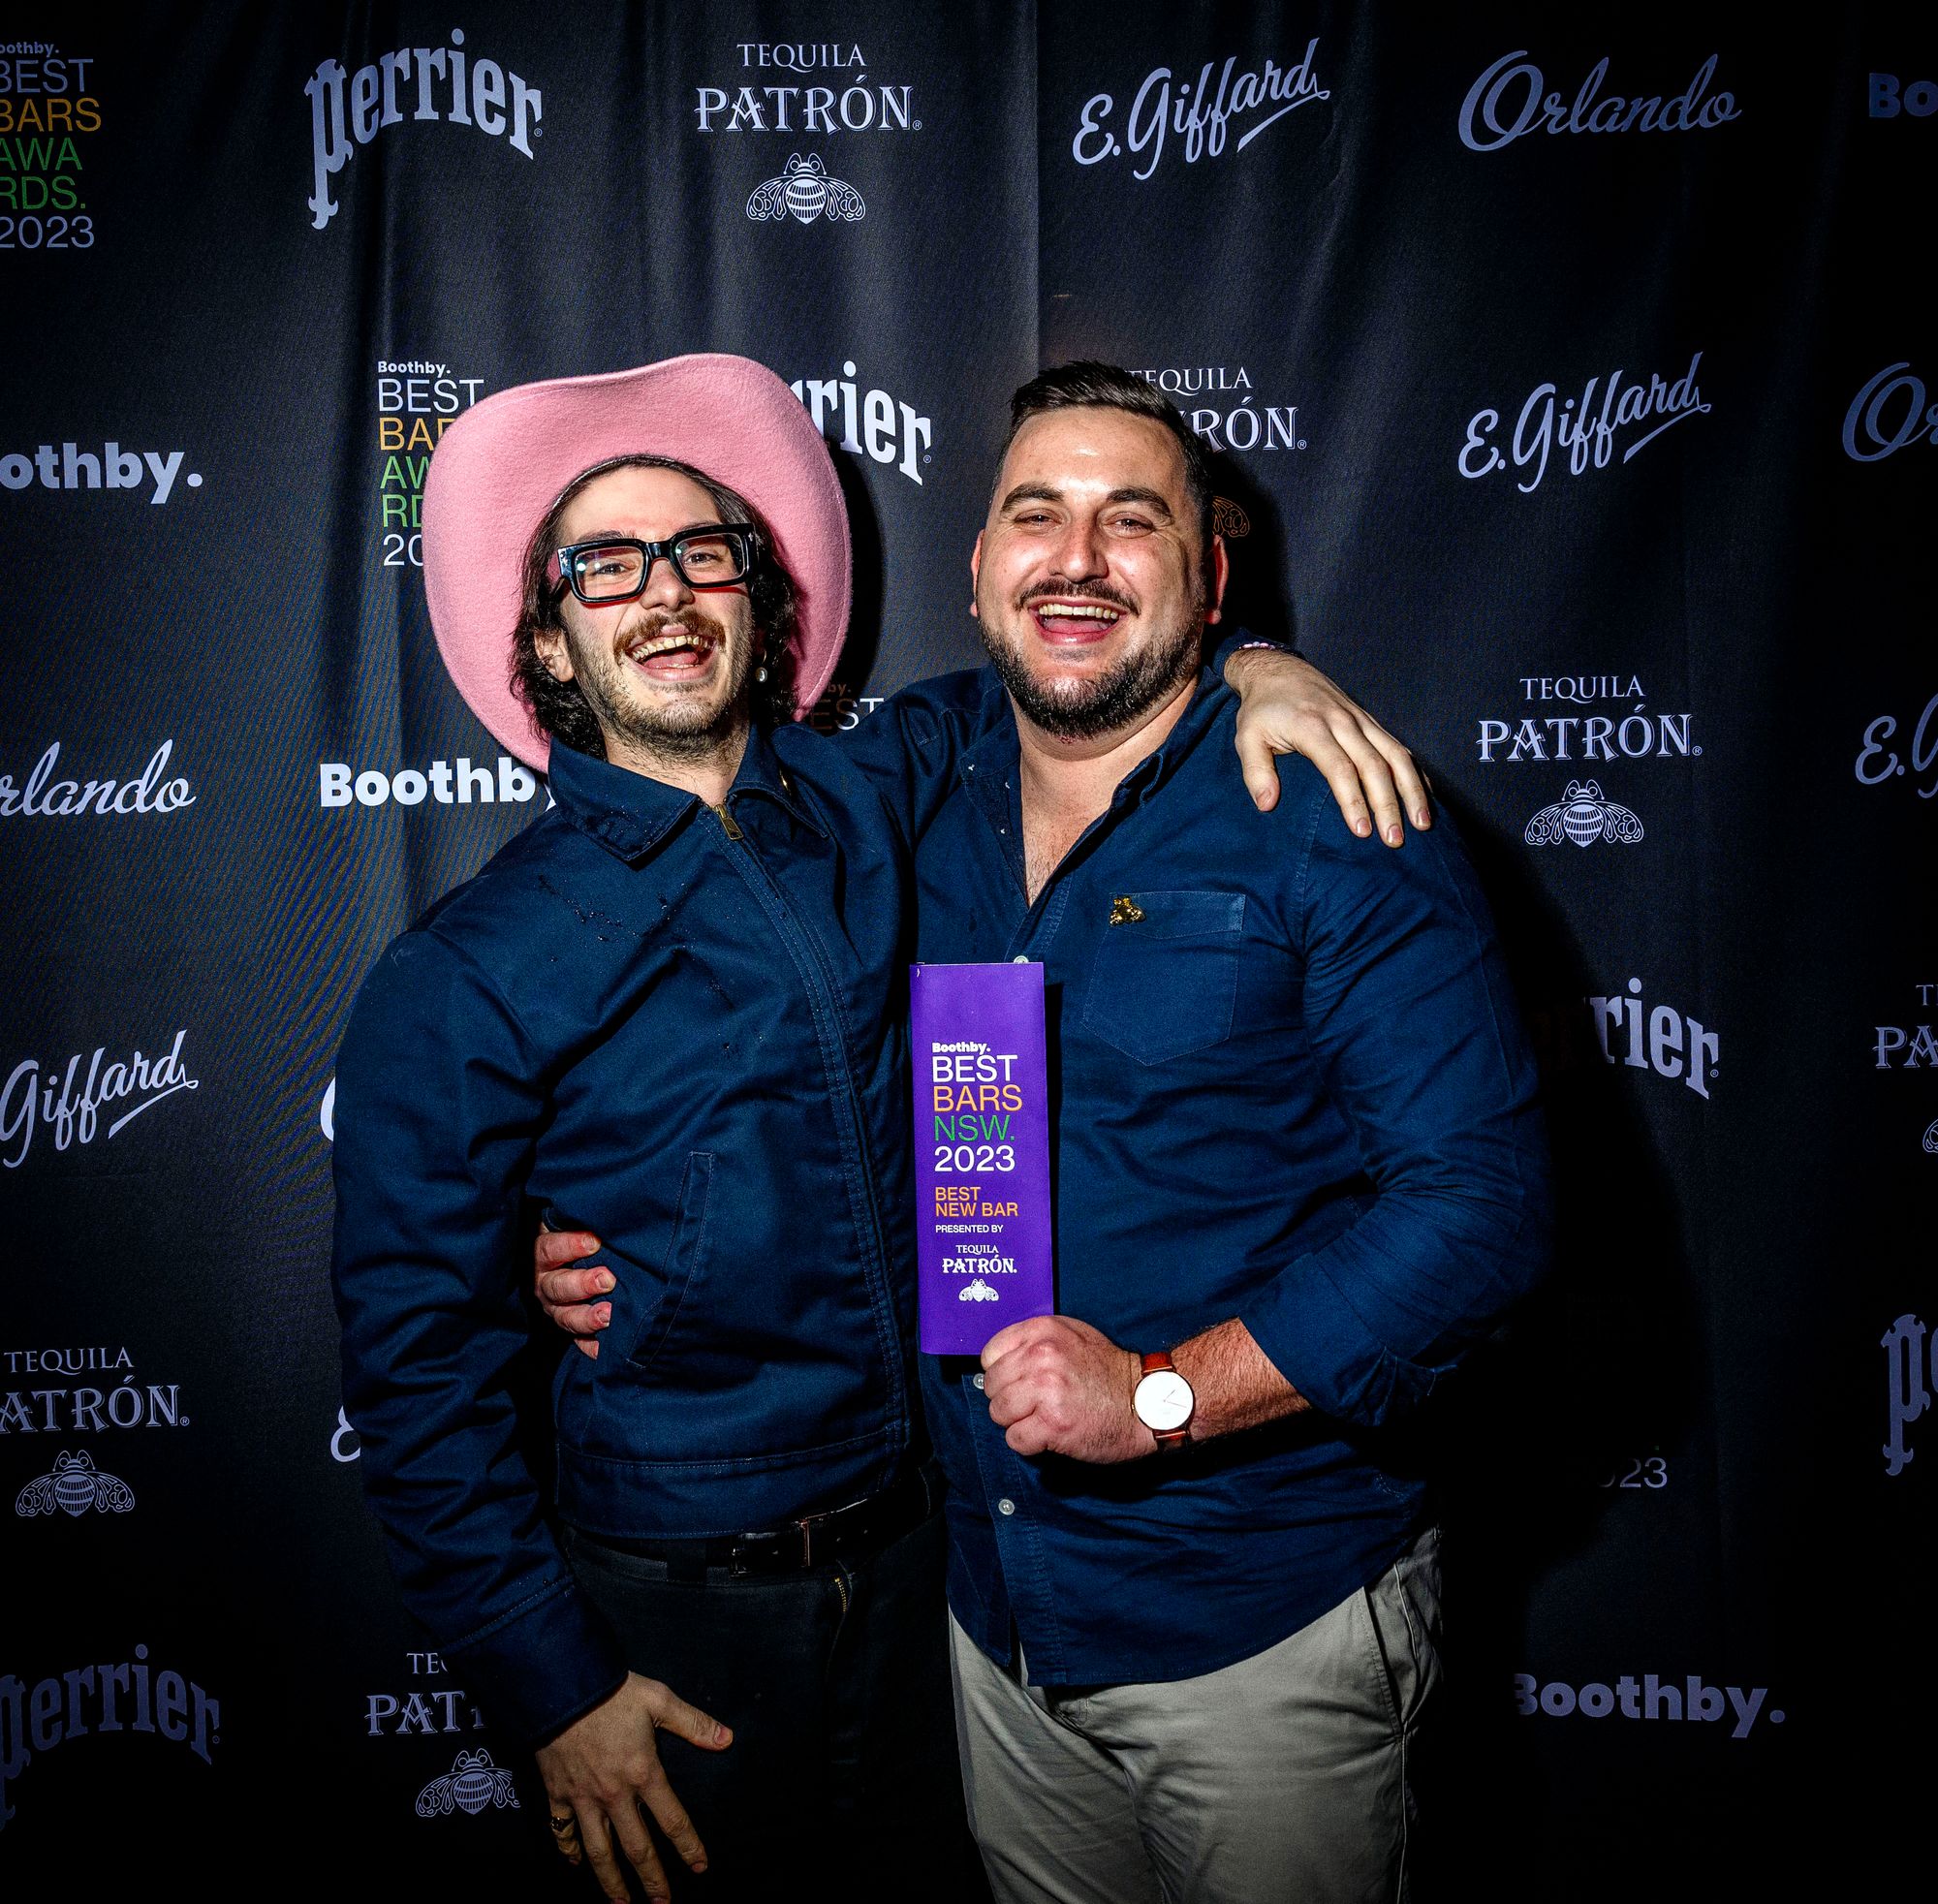 Harrison Kenney with PATRÓN Execution Manager Joseph Chisholm at the awards. Photo: Christopher Pearce